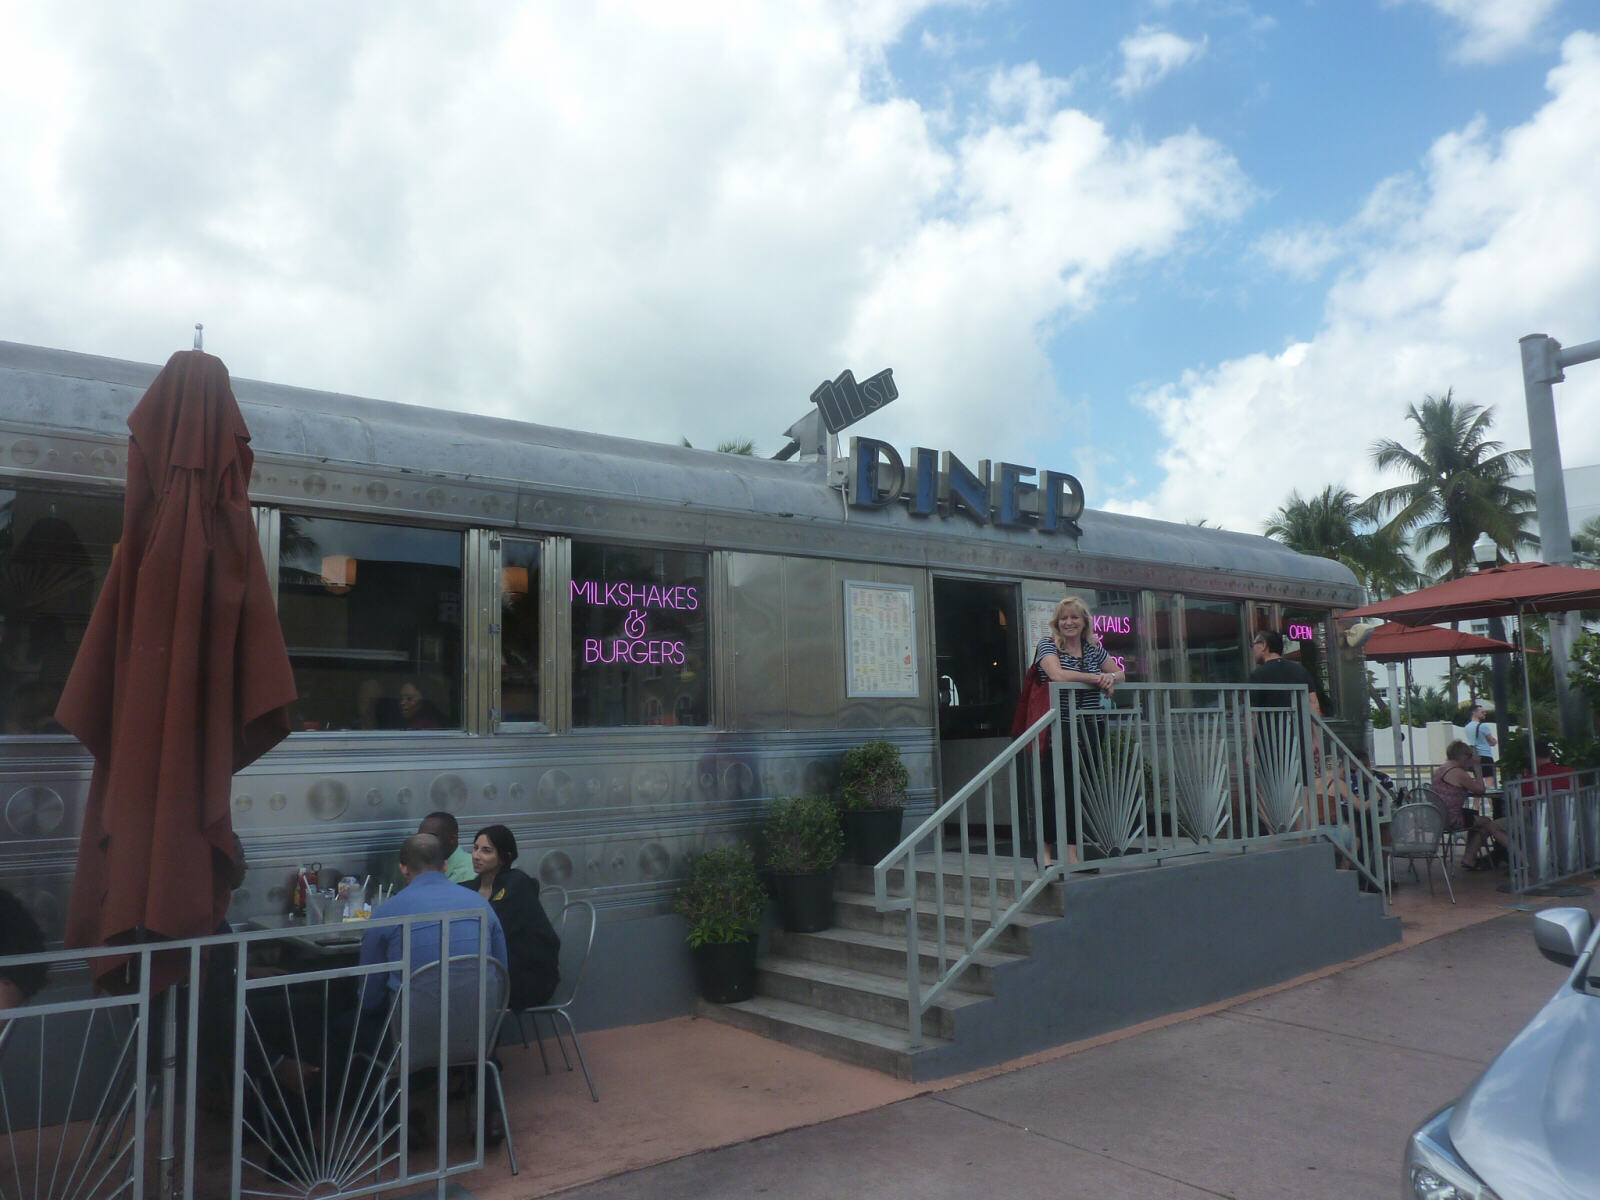 11th Street Diner, just off Ocean Drive, Miami